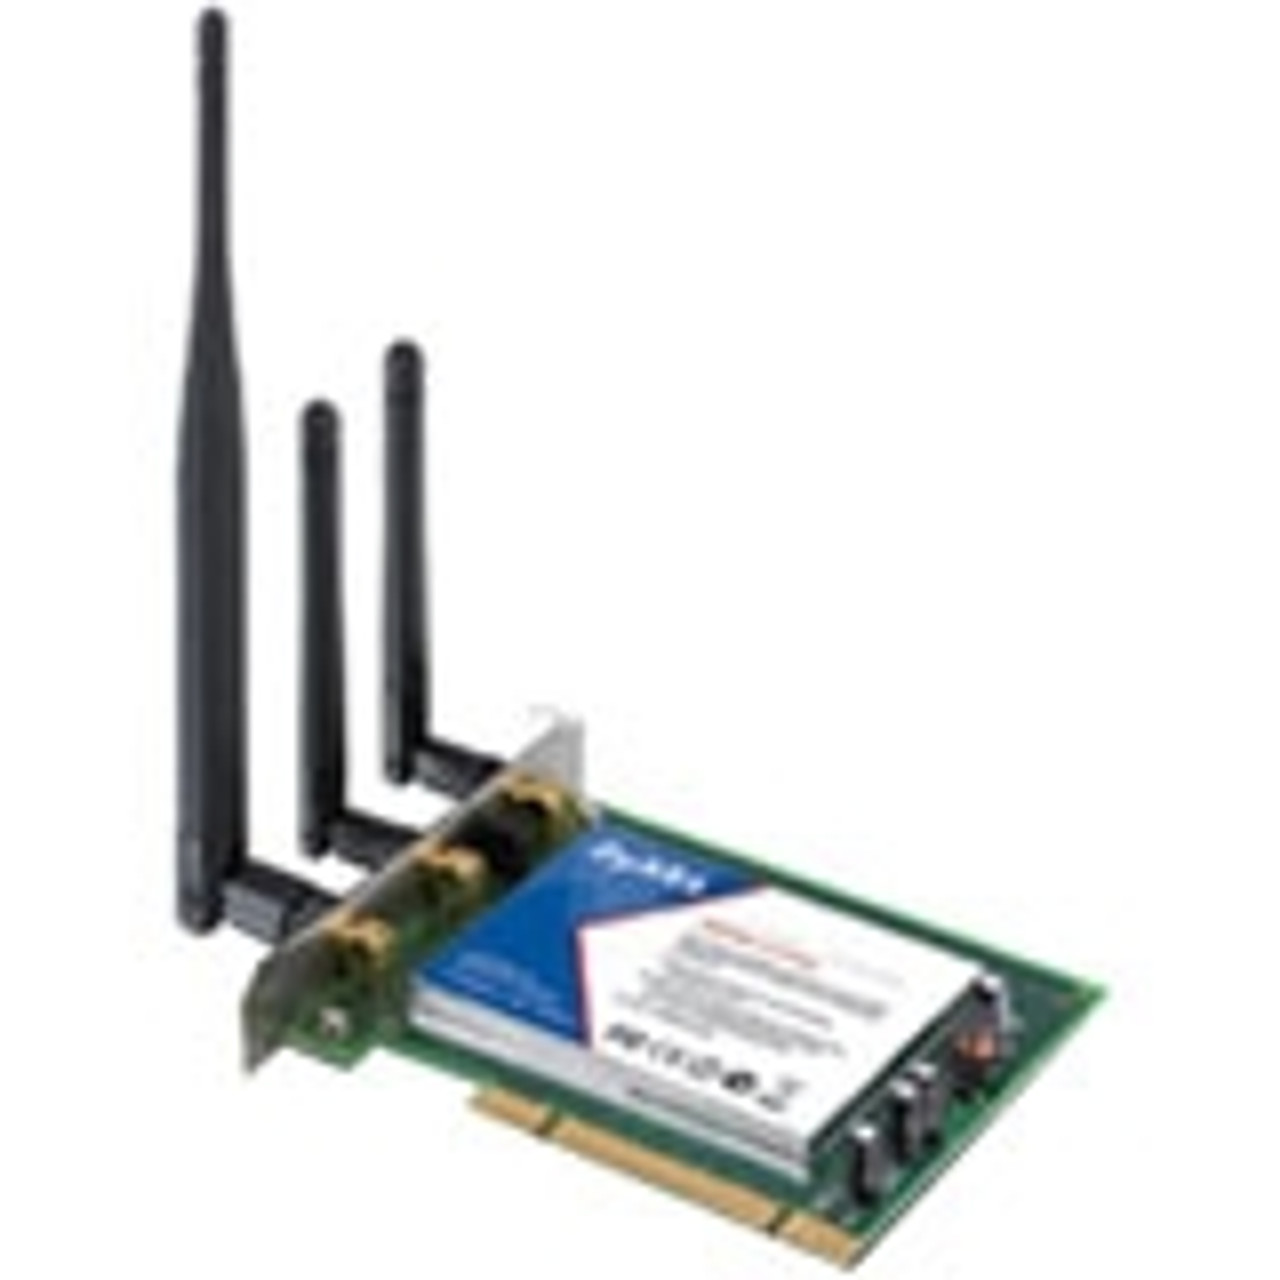 NWD-370N Zyxel NWD-370N Wireless PCI Adapter PCI 300Mbps